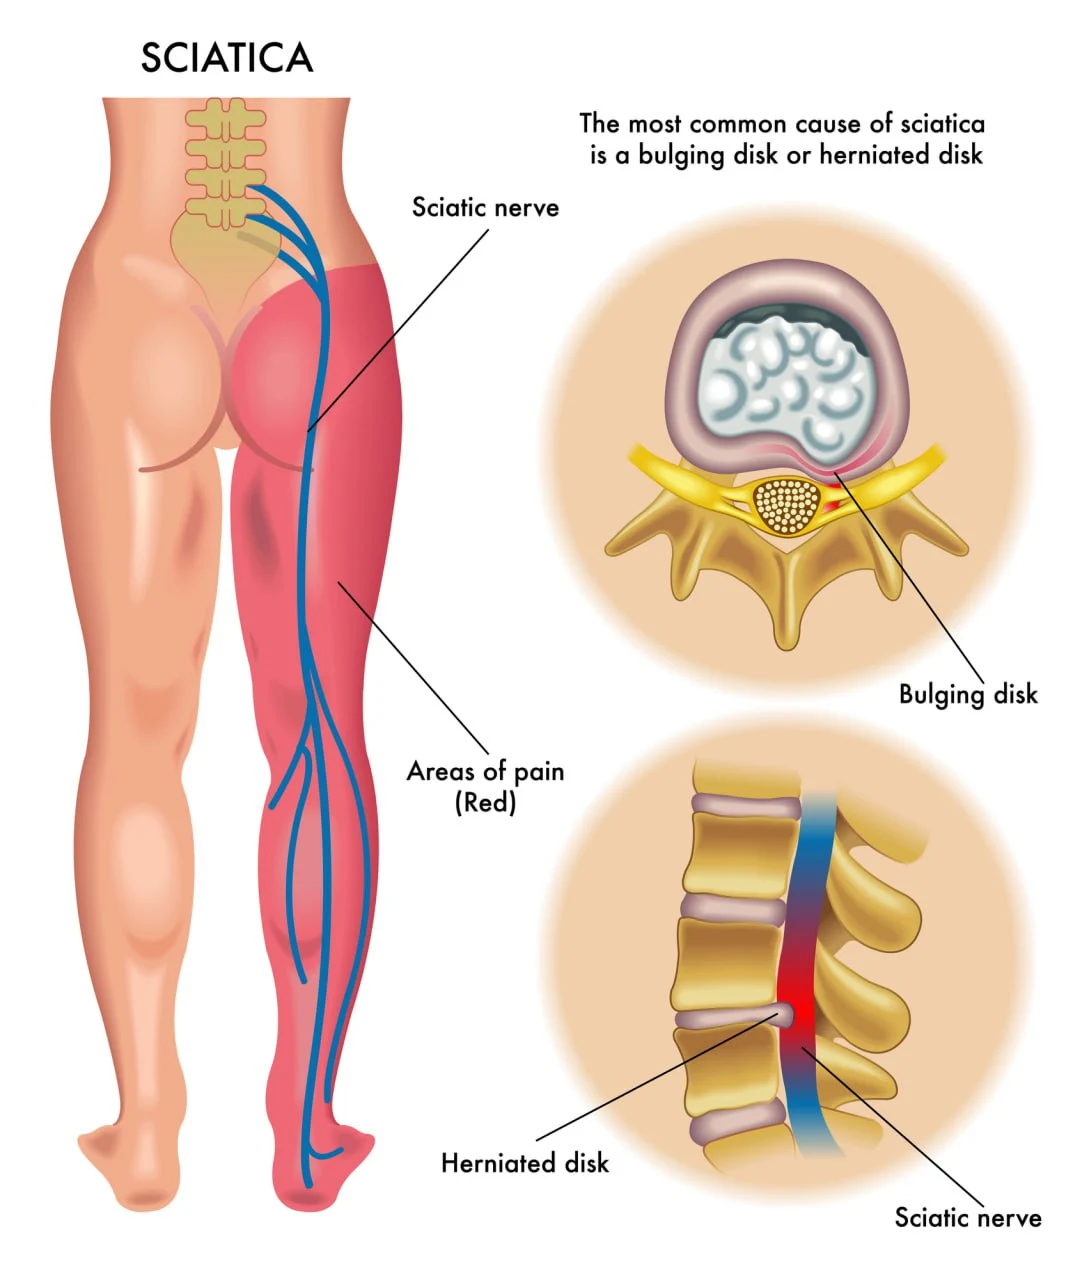 The most common cause of sciatica is a bulging disk or herniated disk. Image of sciatic nerve in lumbar down to feet and then images of herniated and bulging disk to the right